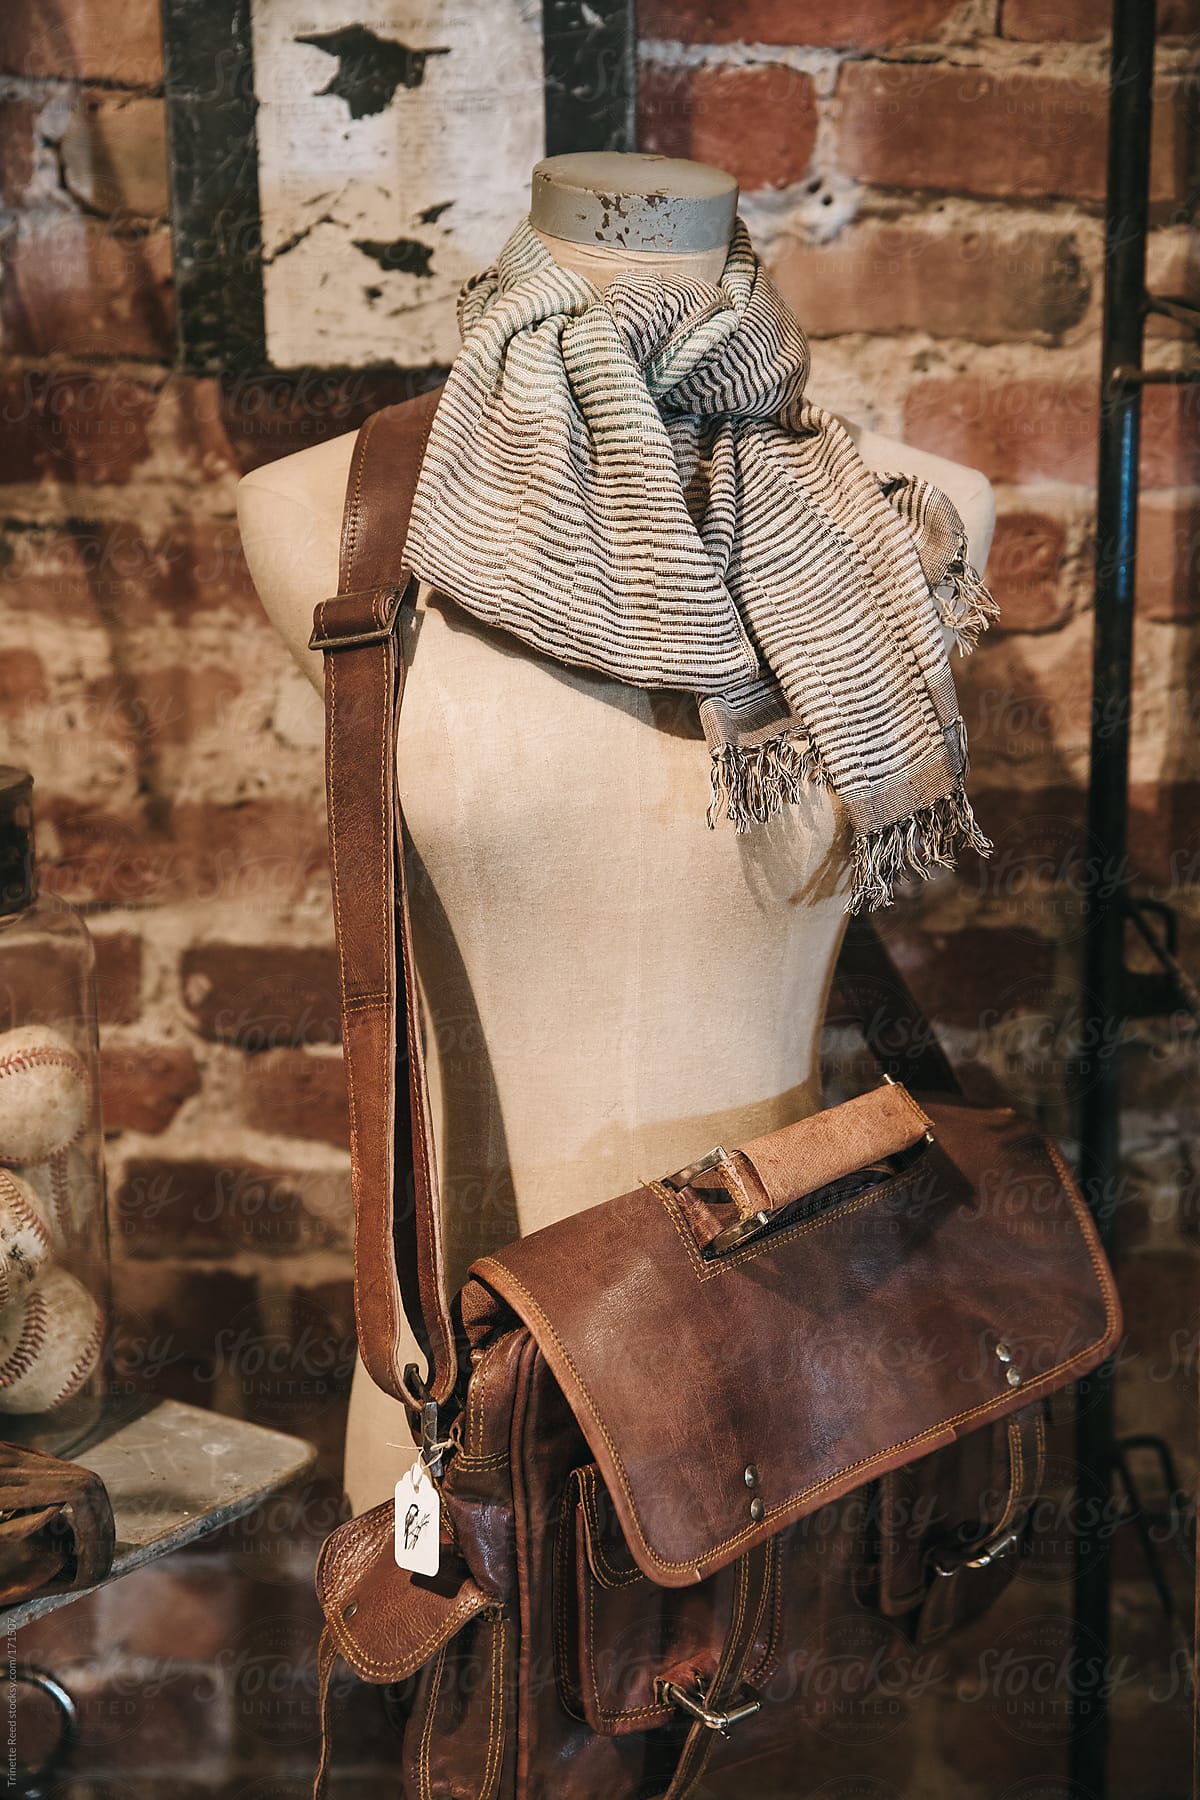 Mannequin with leather bag inside small boutique store